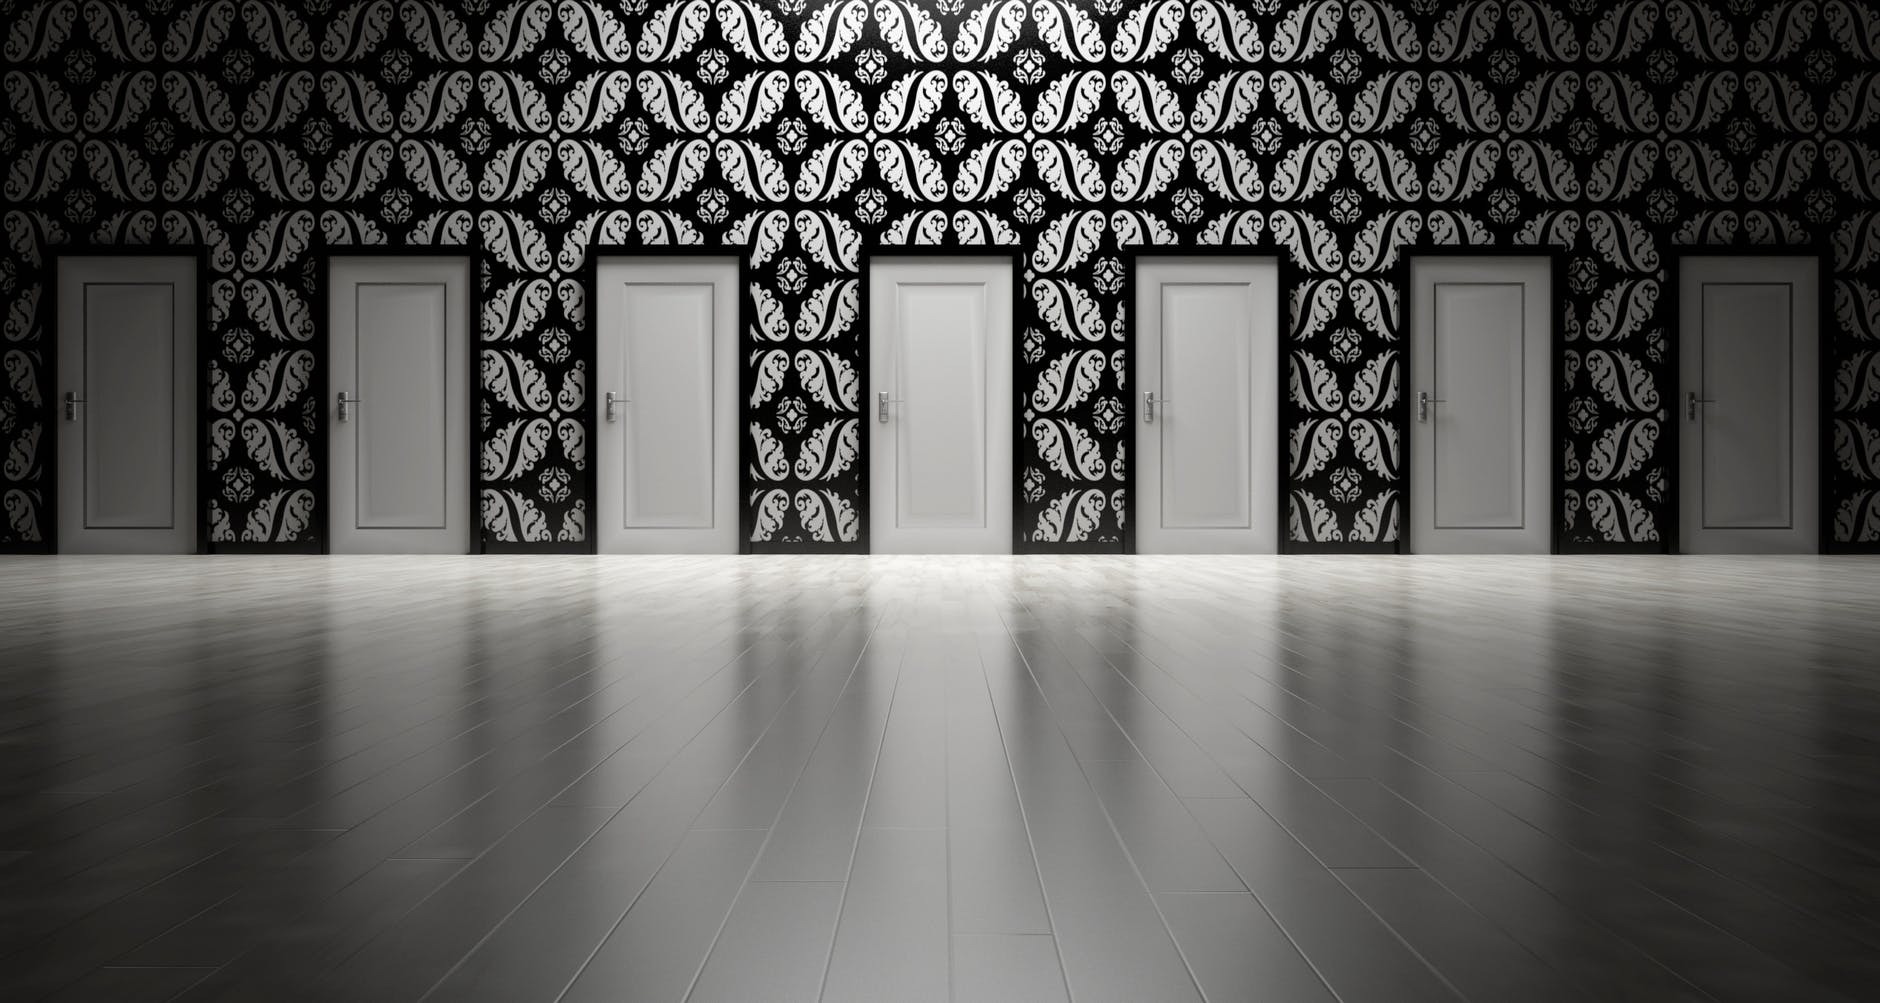 Seven identical doors in a wallpapered wall